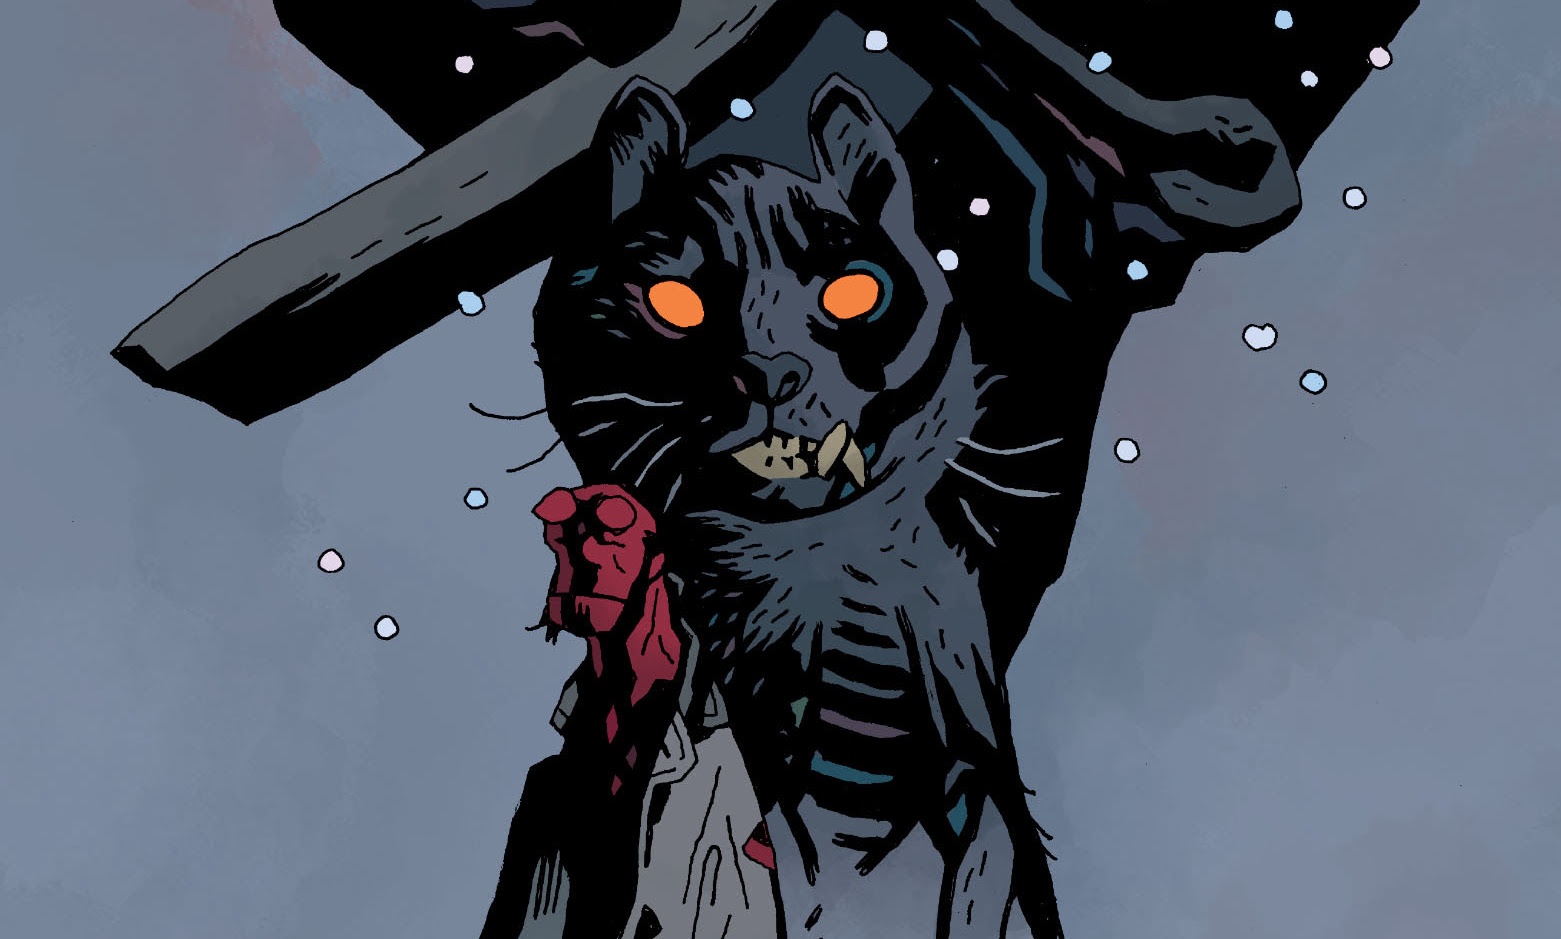 Celebrate the holidays with 'Hellboy Winter Special: The Yule Cat' December 6th